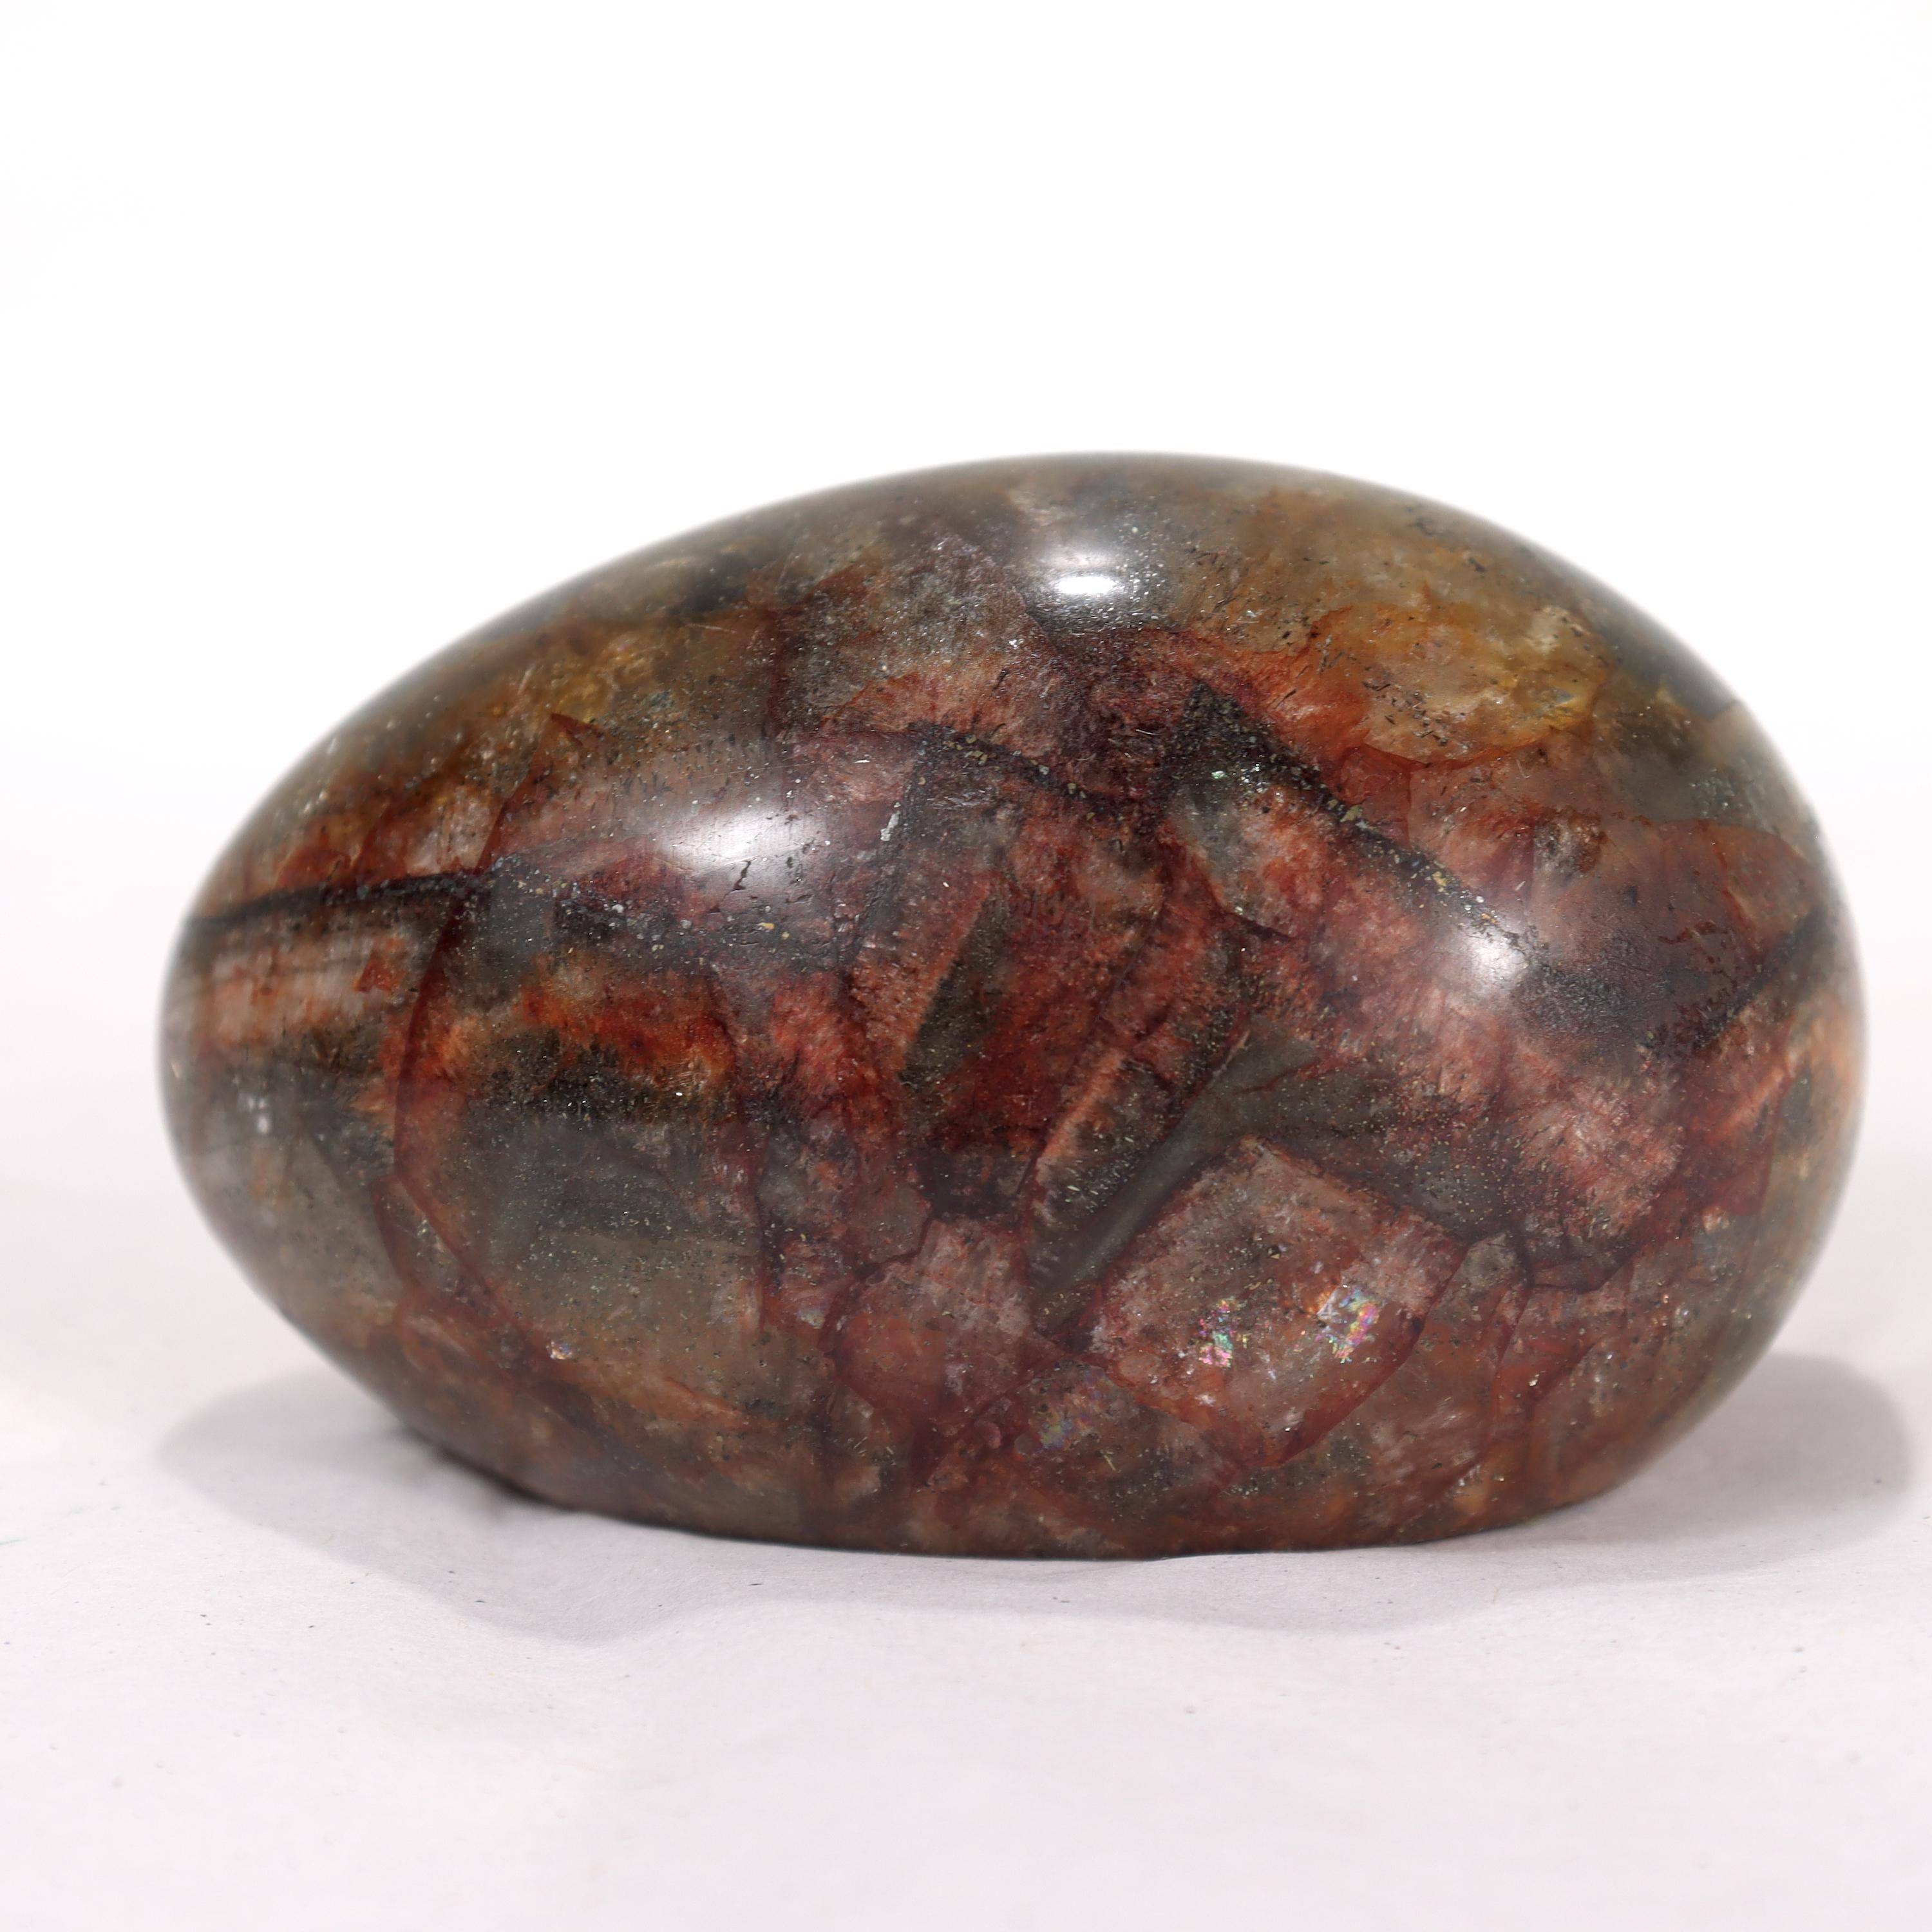 A fine antique paperweight.

Comprised of Blue John (also known as Derbyshire Spar), a rare form of fluorite from England with distinct purple & yellow band patterns.

In an ovoid egg shape with a red felt base.

Simply a great